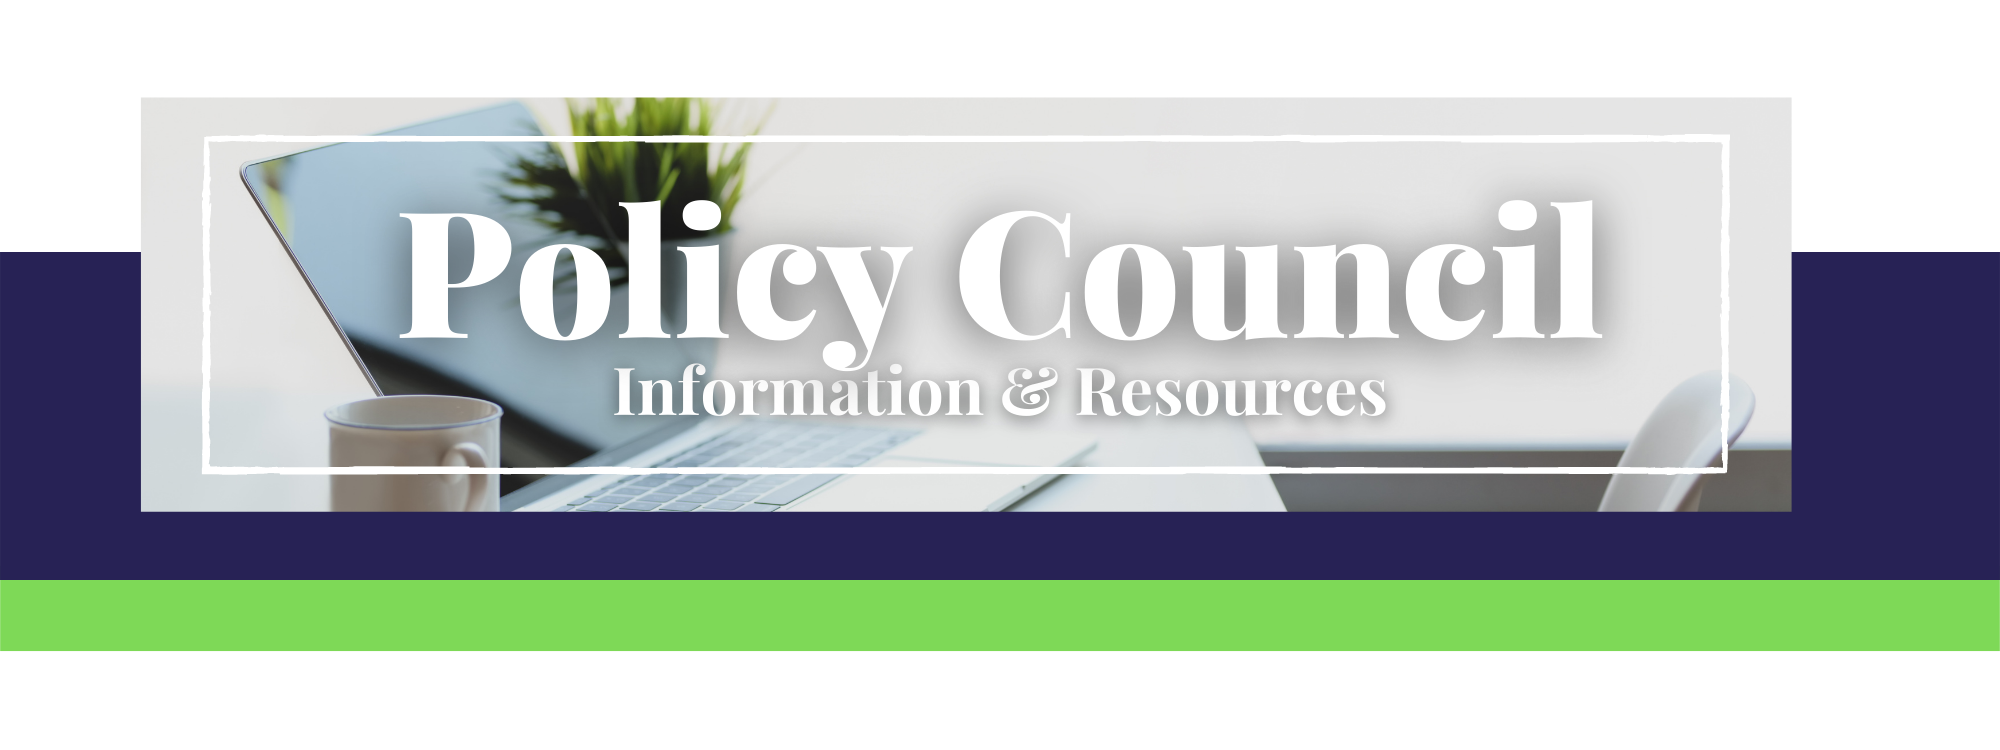 policy council header with laptop and green plant